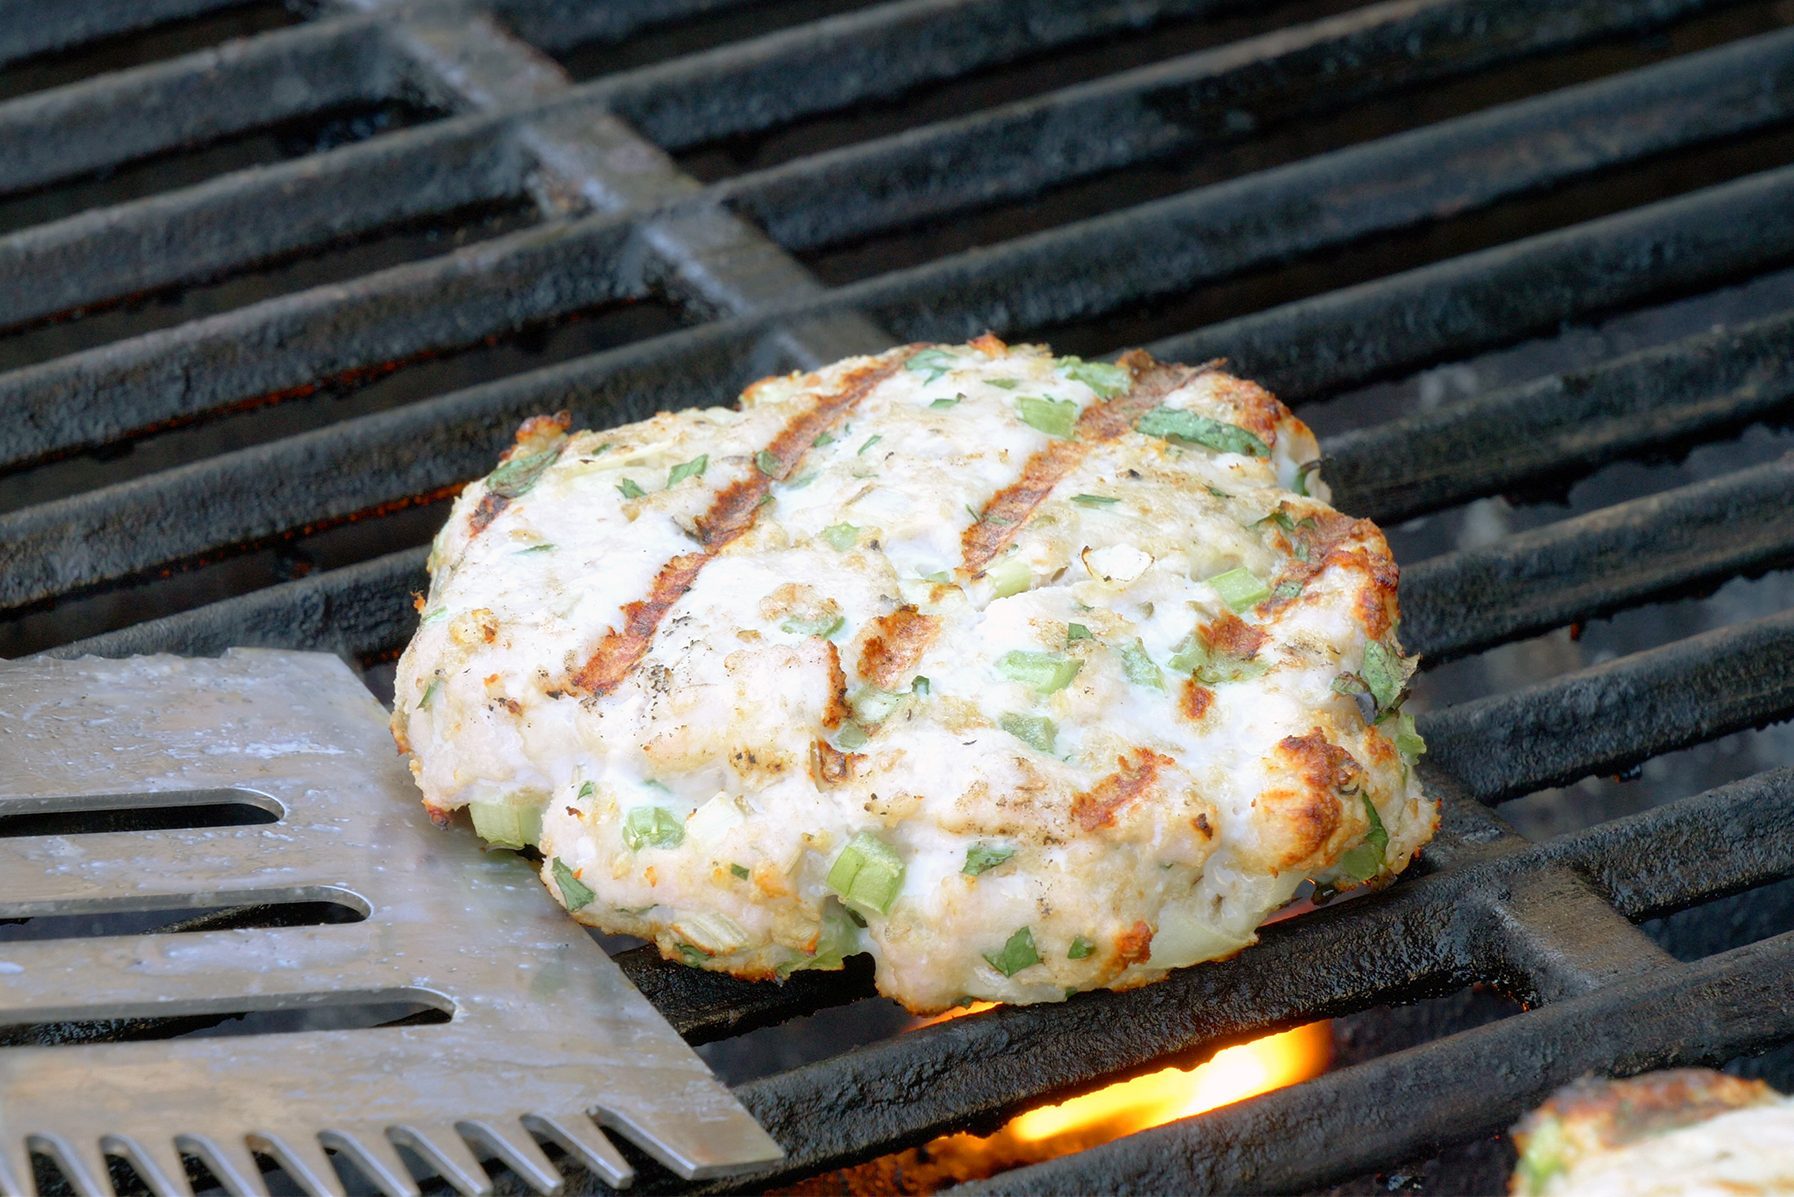 A close-up of a chicken patty mixed with chopped green onions being grilled on an open flame barbecue.